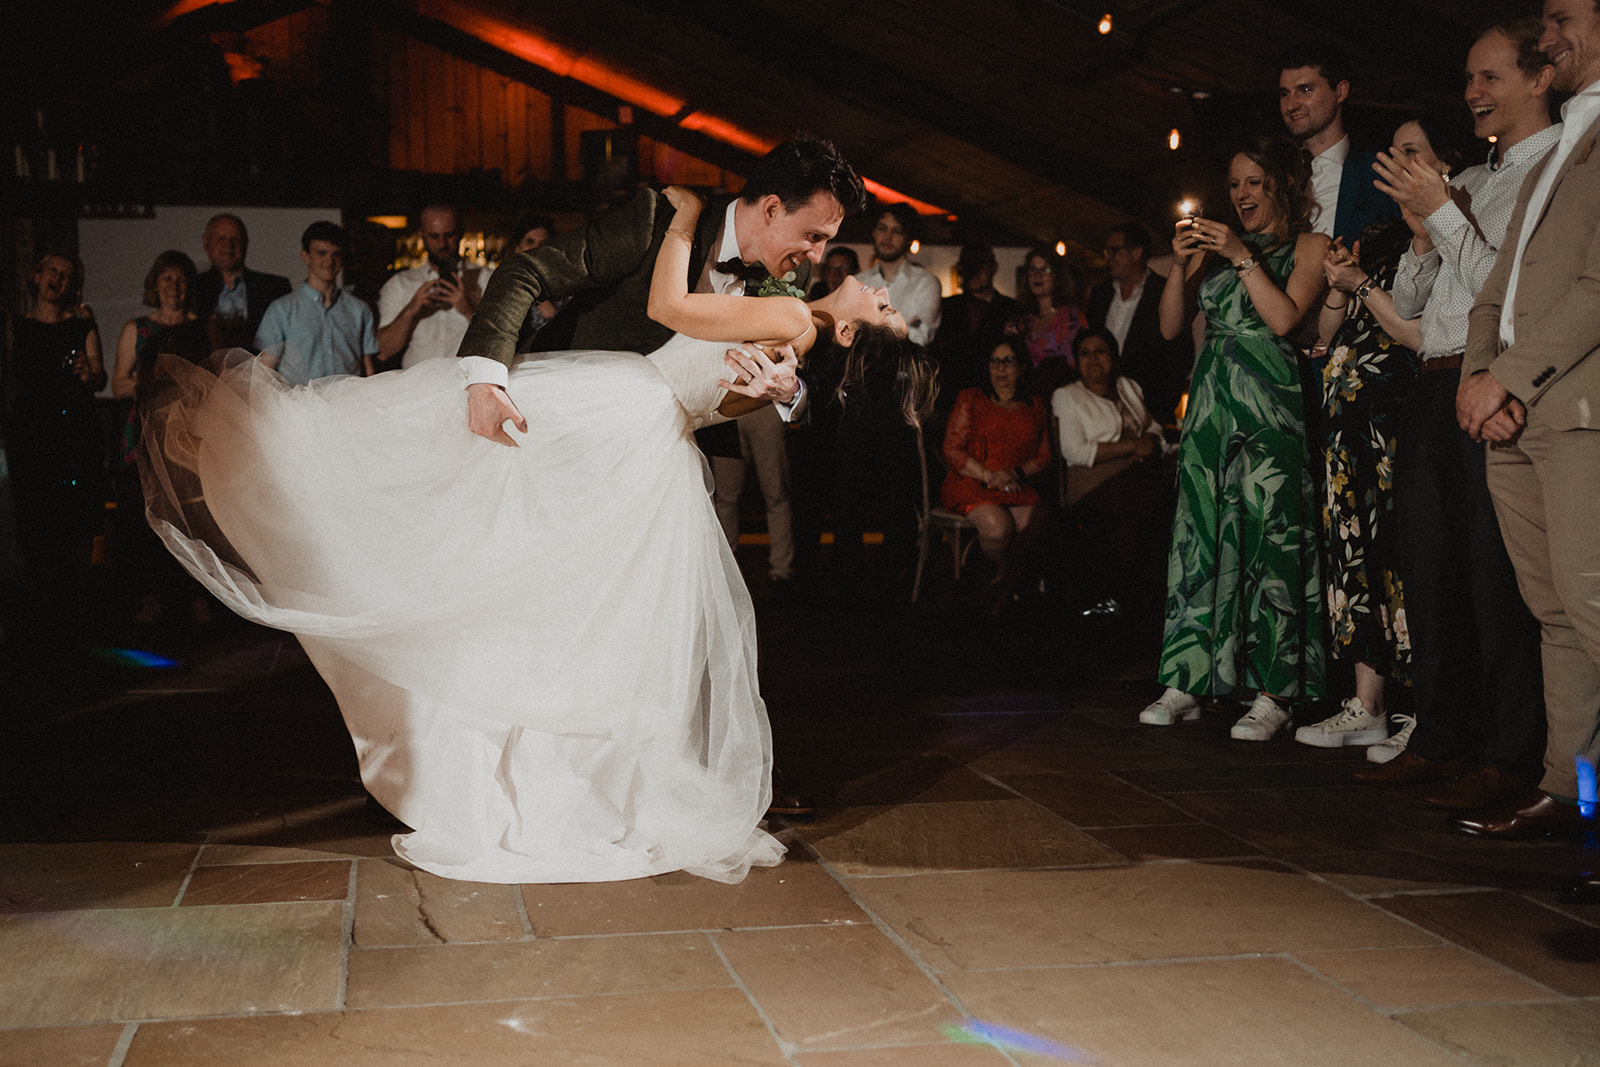 groom dipping his bride on the dance floor at their wedding